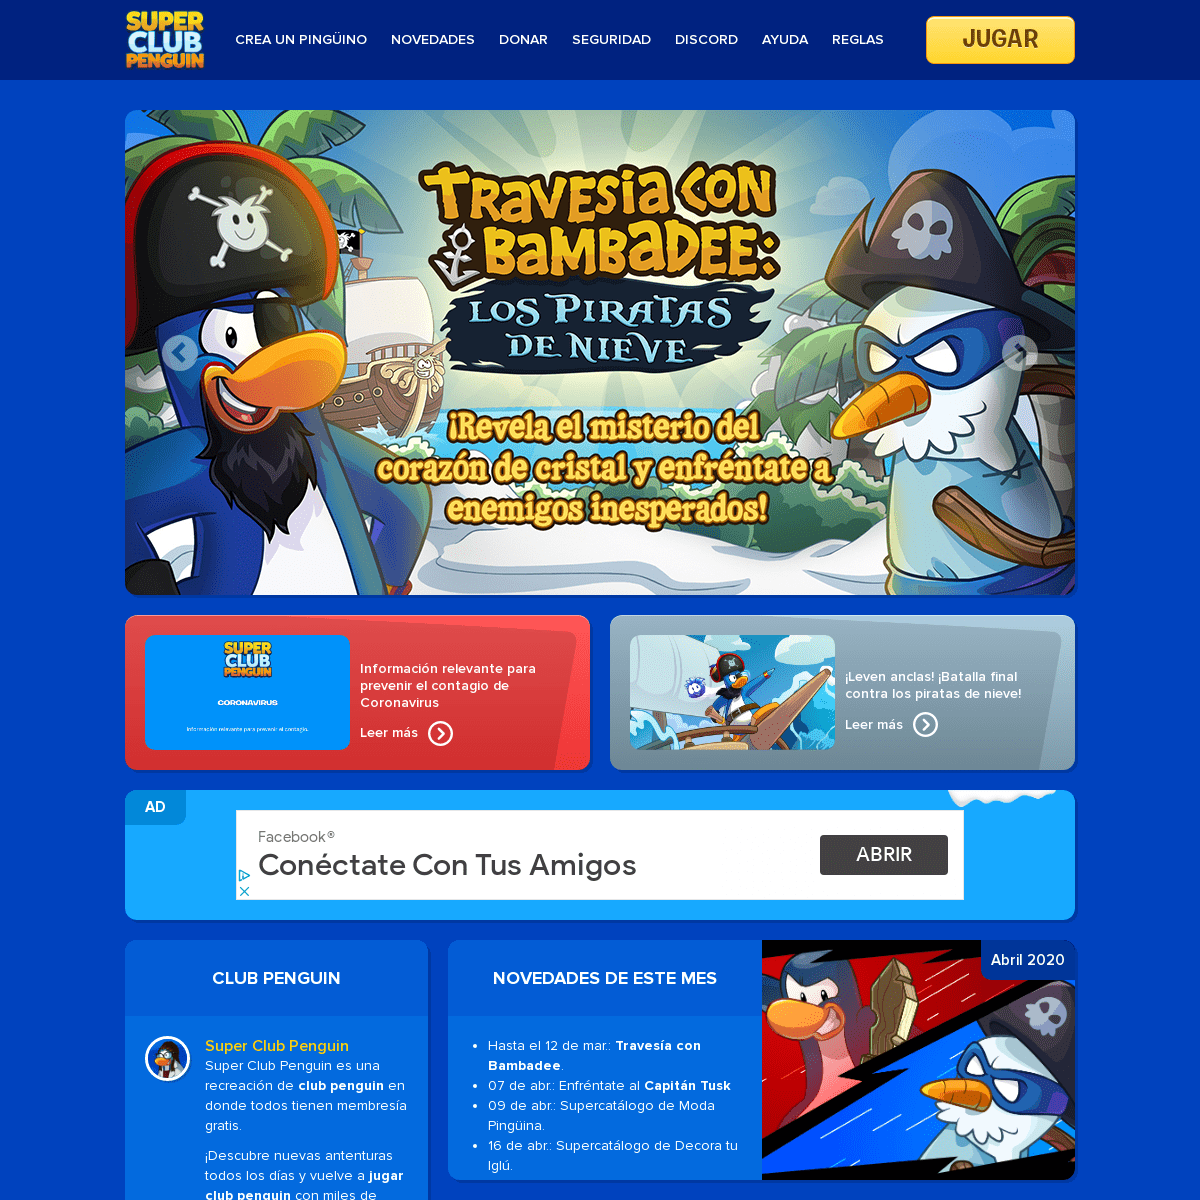 A complete backup of supercpps.com